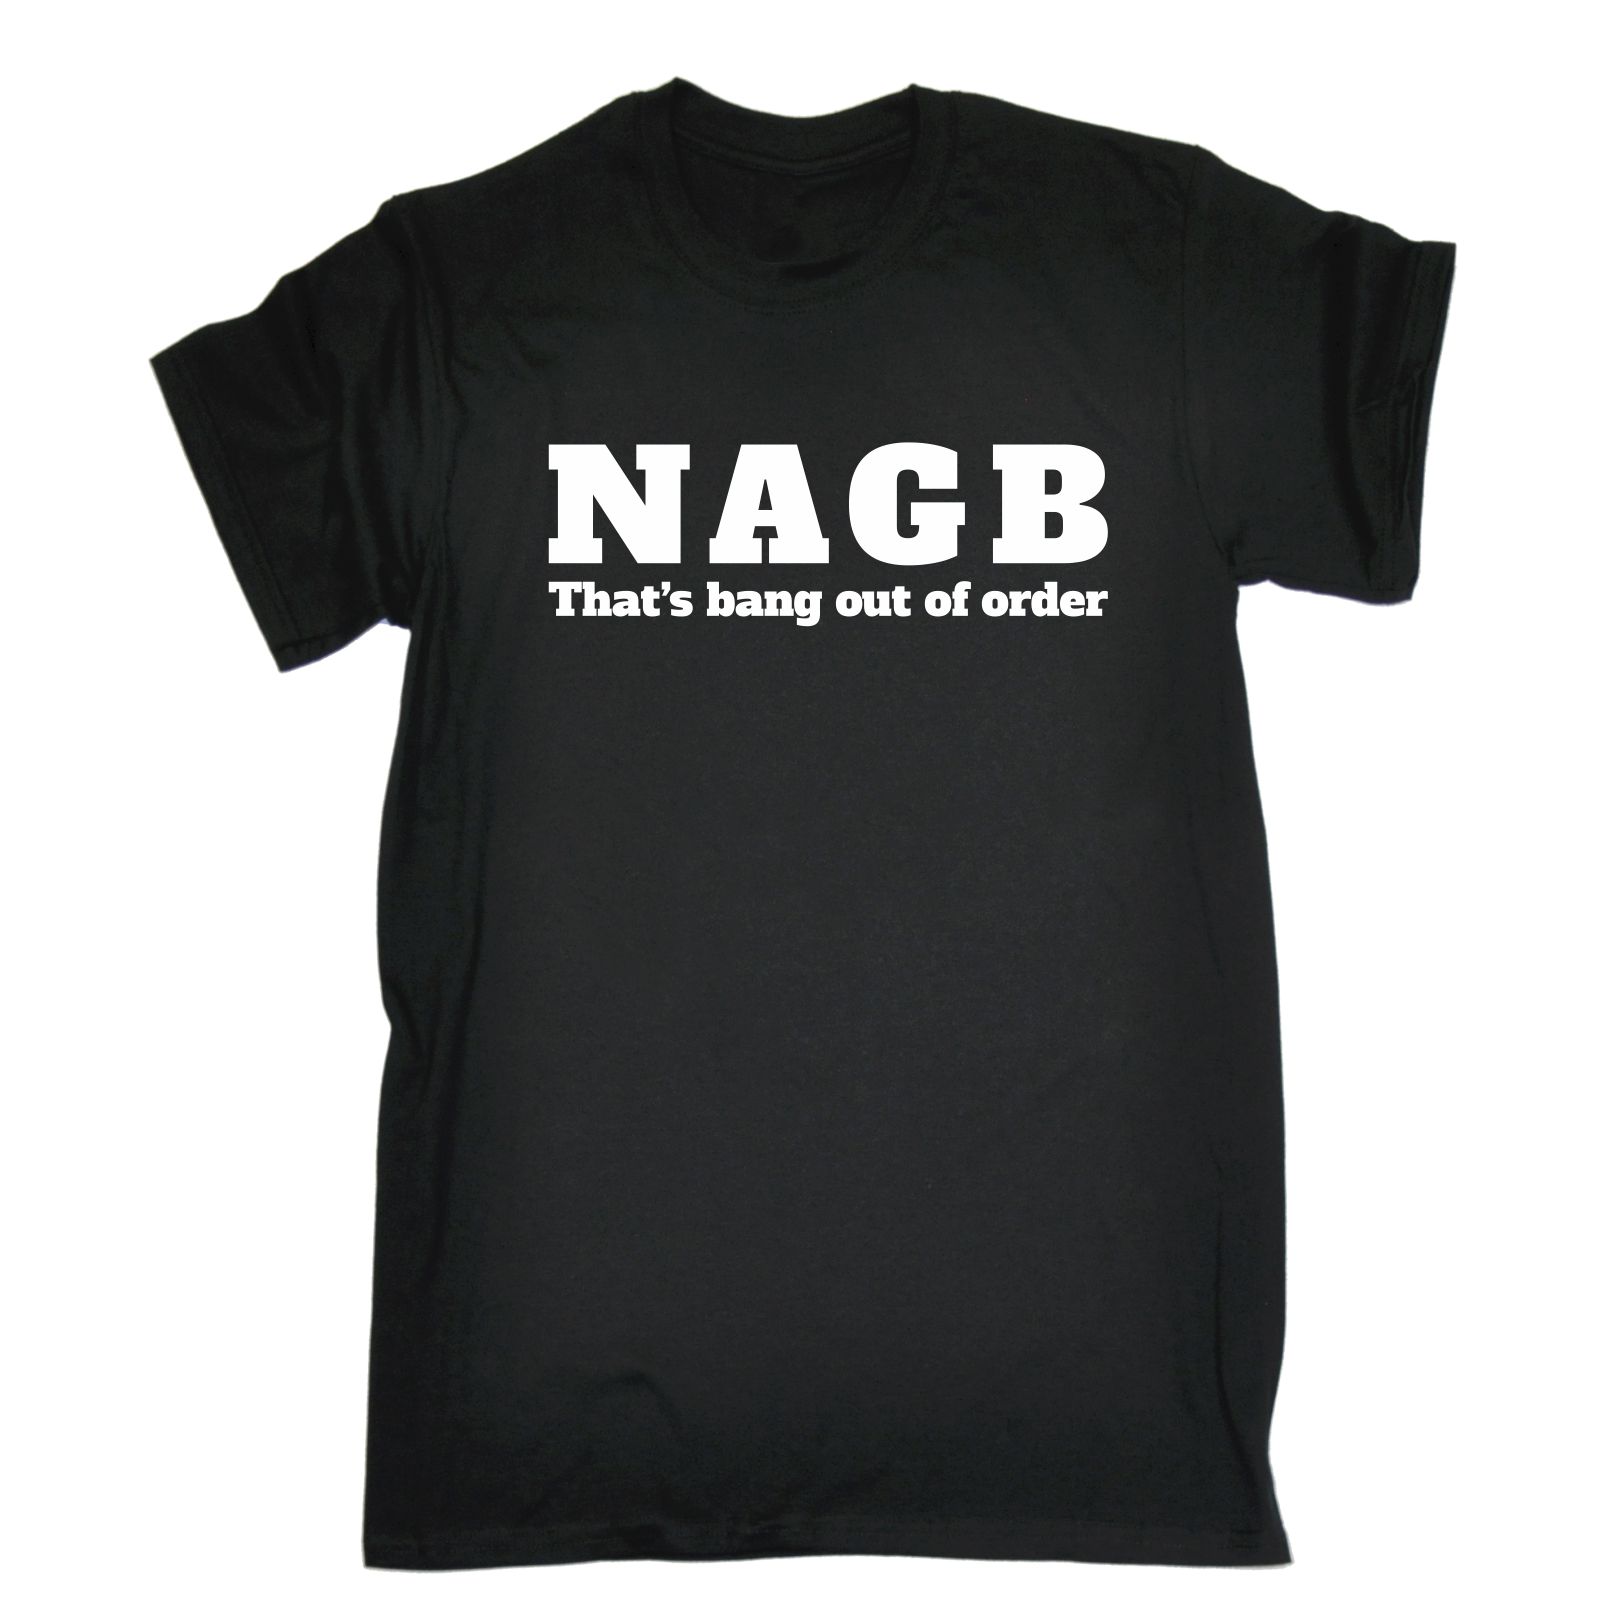 Nagb THATS Bang Out of Order Sweat-shirt anniversaire Fashion Funny politiques Blague 